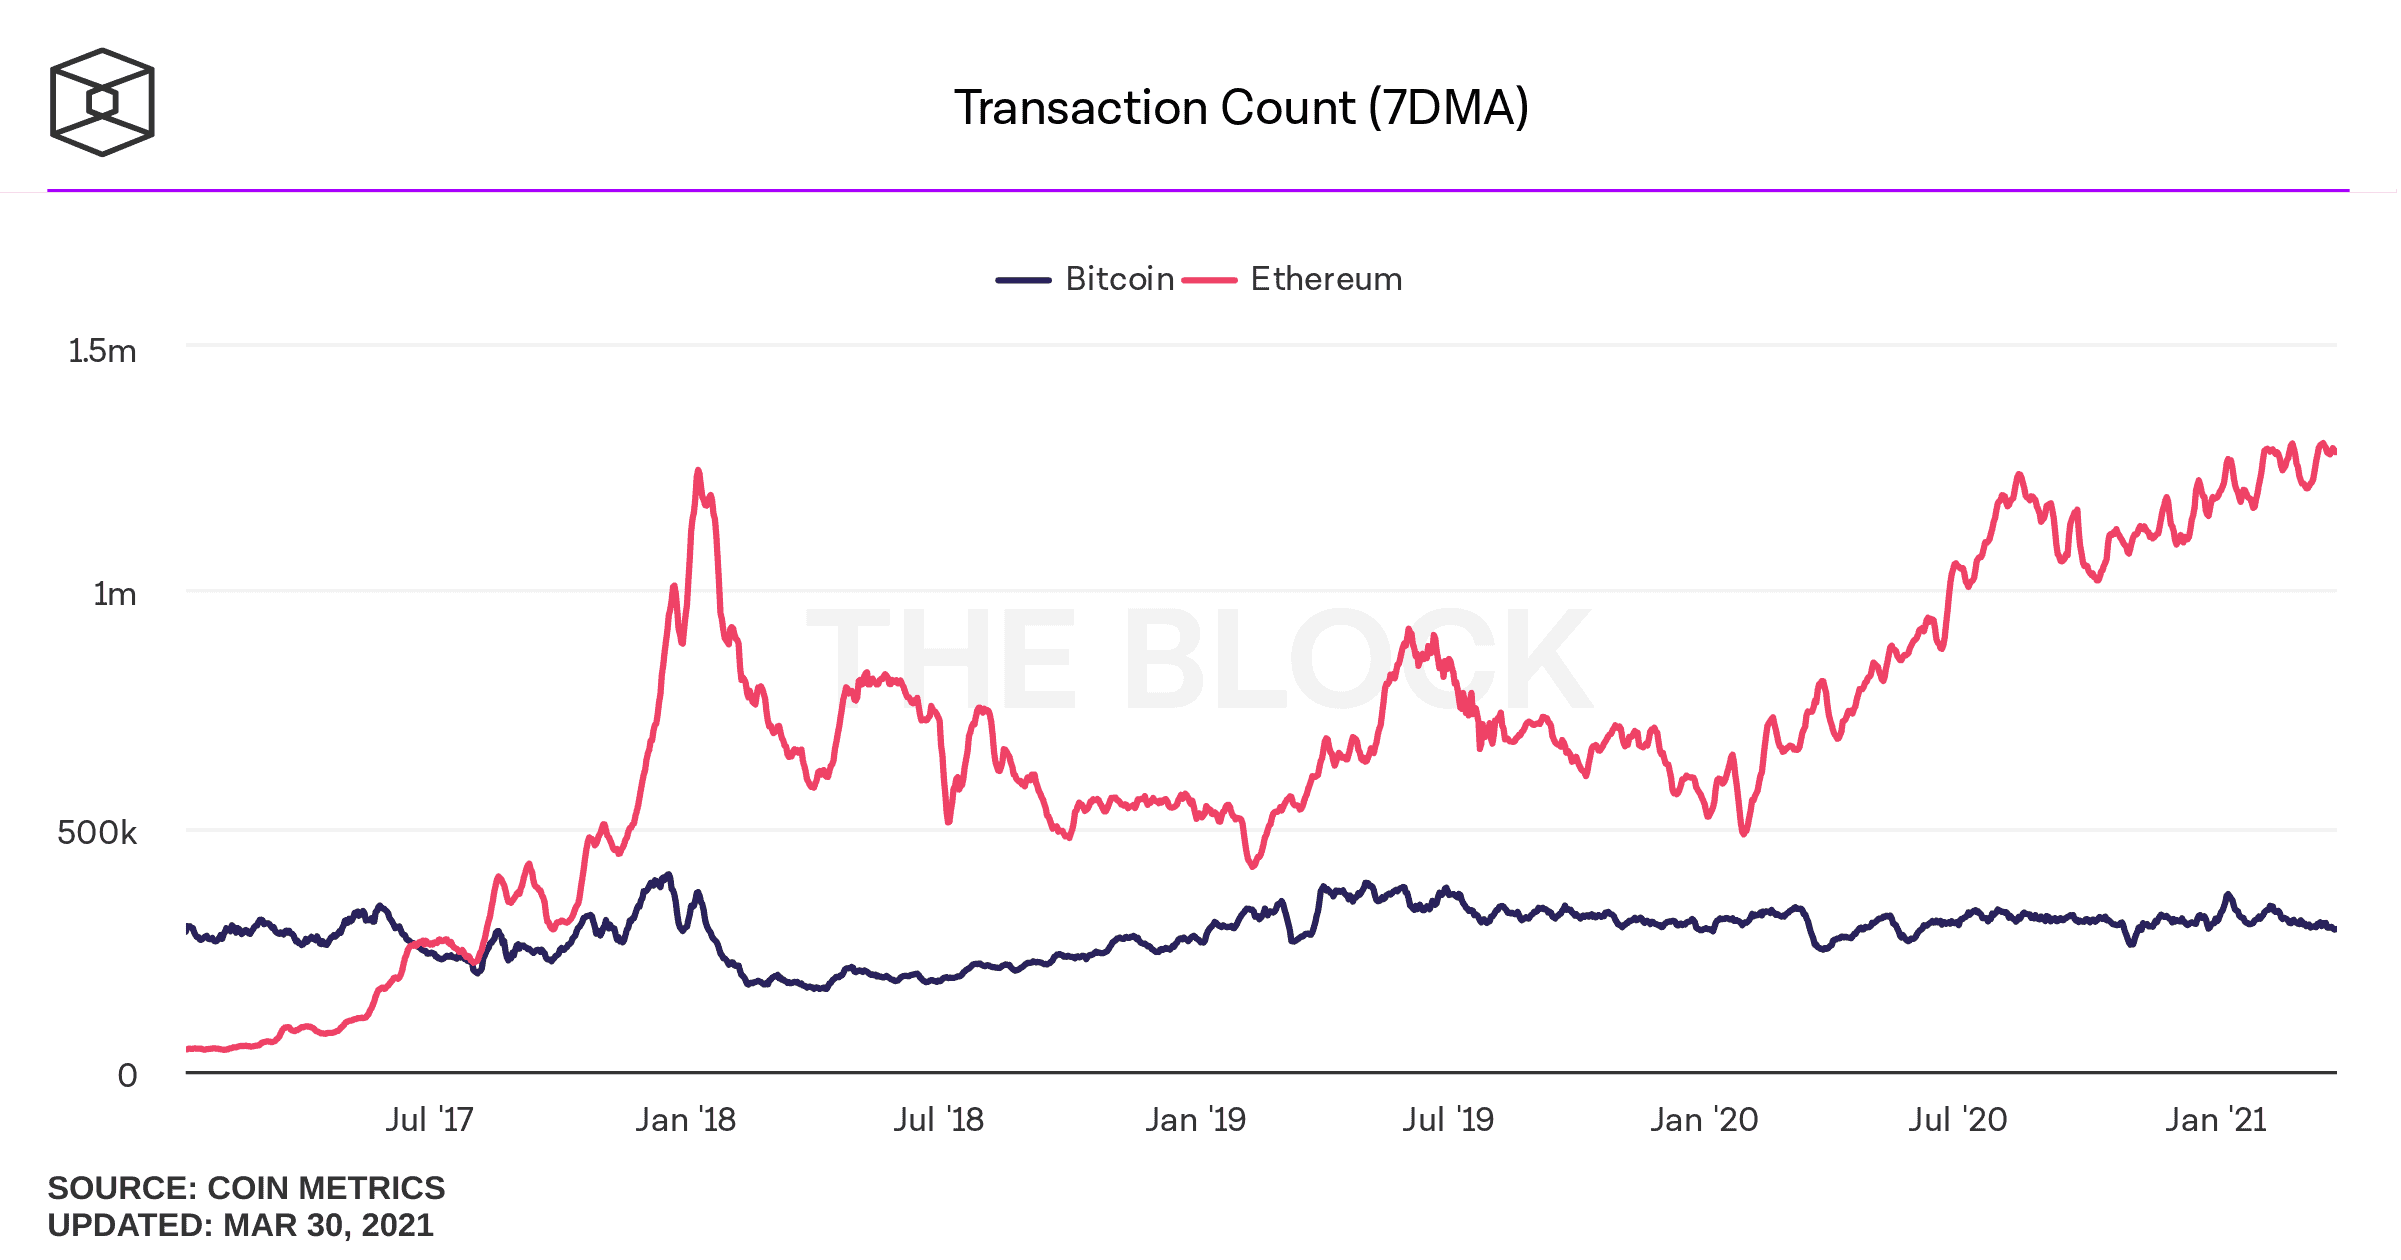 Ethereum transaction volumes are increasing exponentially while Bitcoin volumes remain flat since early 2020.